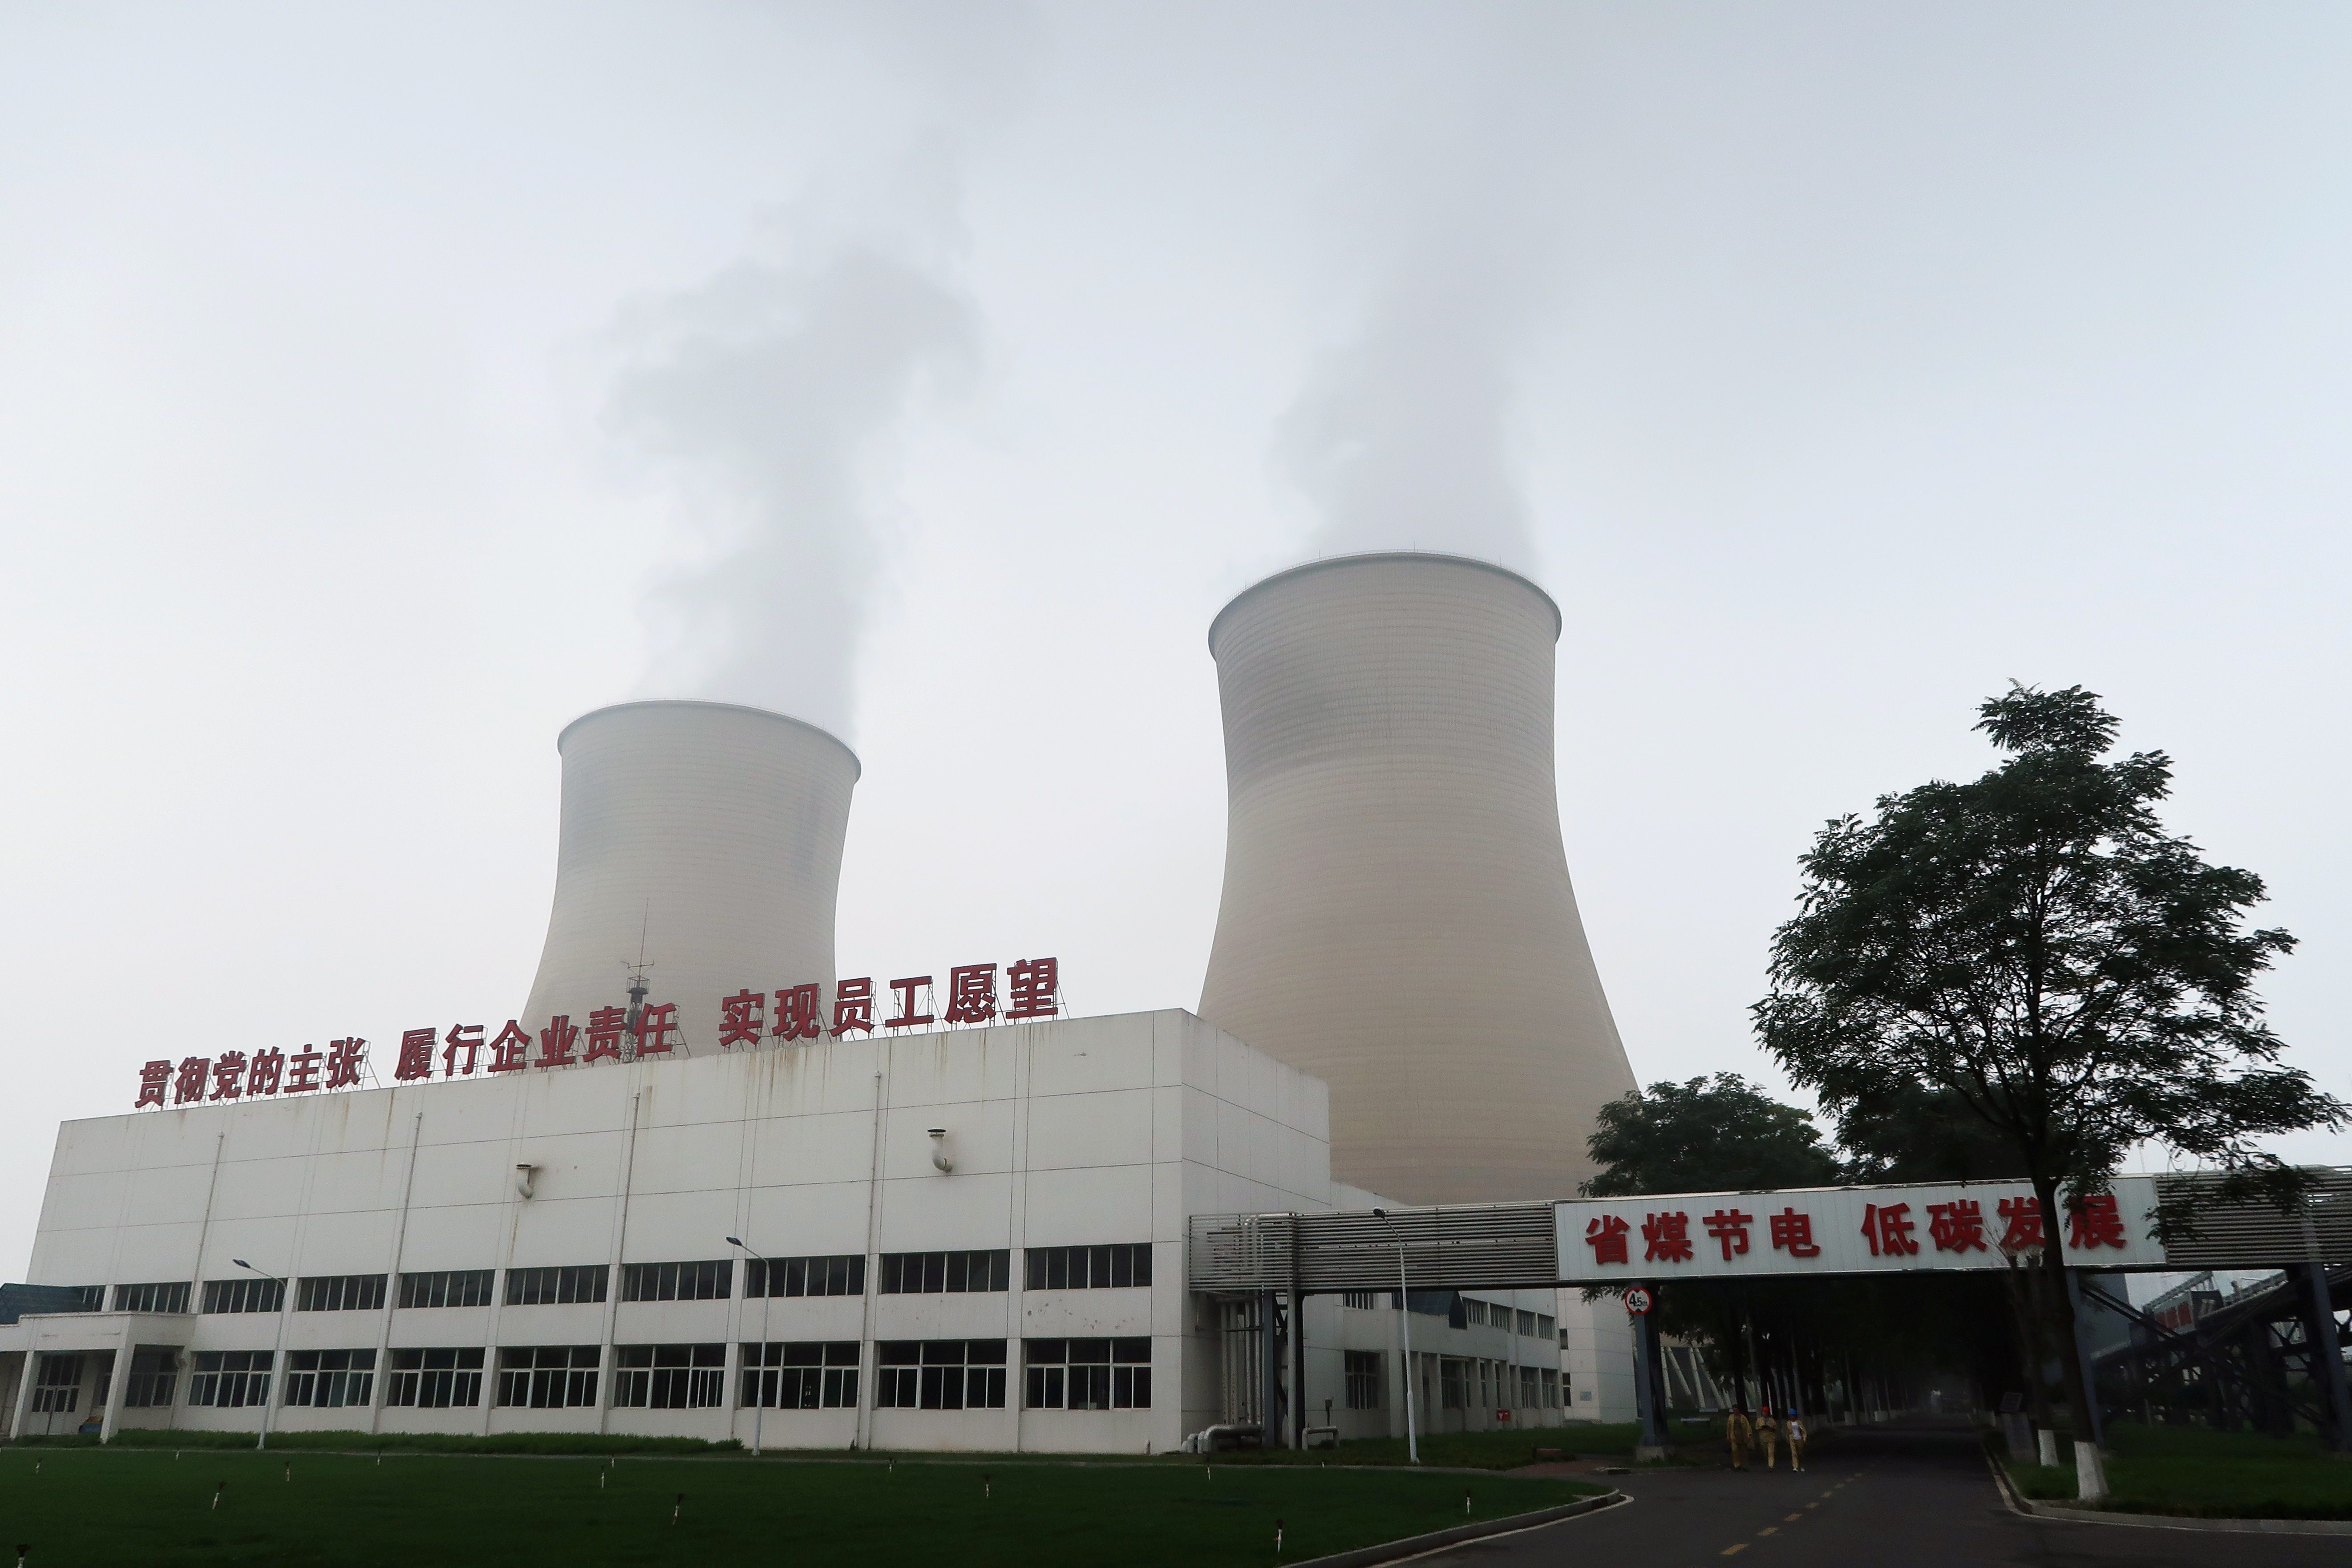 Smoke is seen from cooling towers of a China Energy ultra-low emission coal-fired power plant during a media tour, in Sanhe